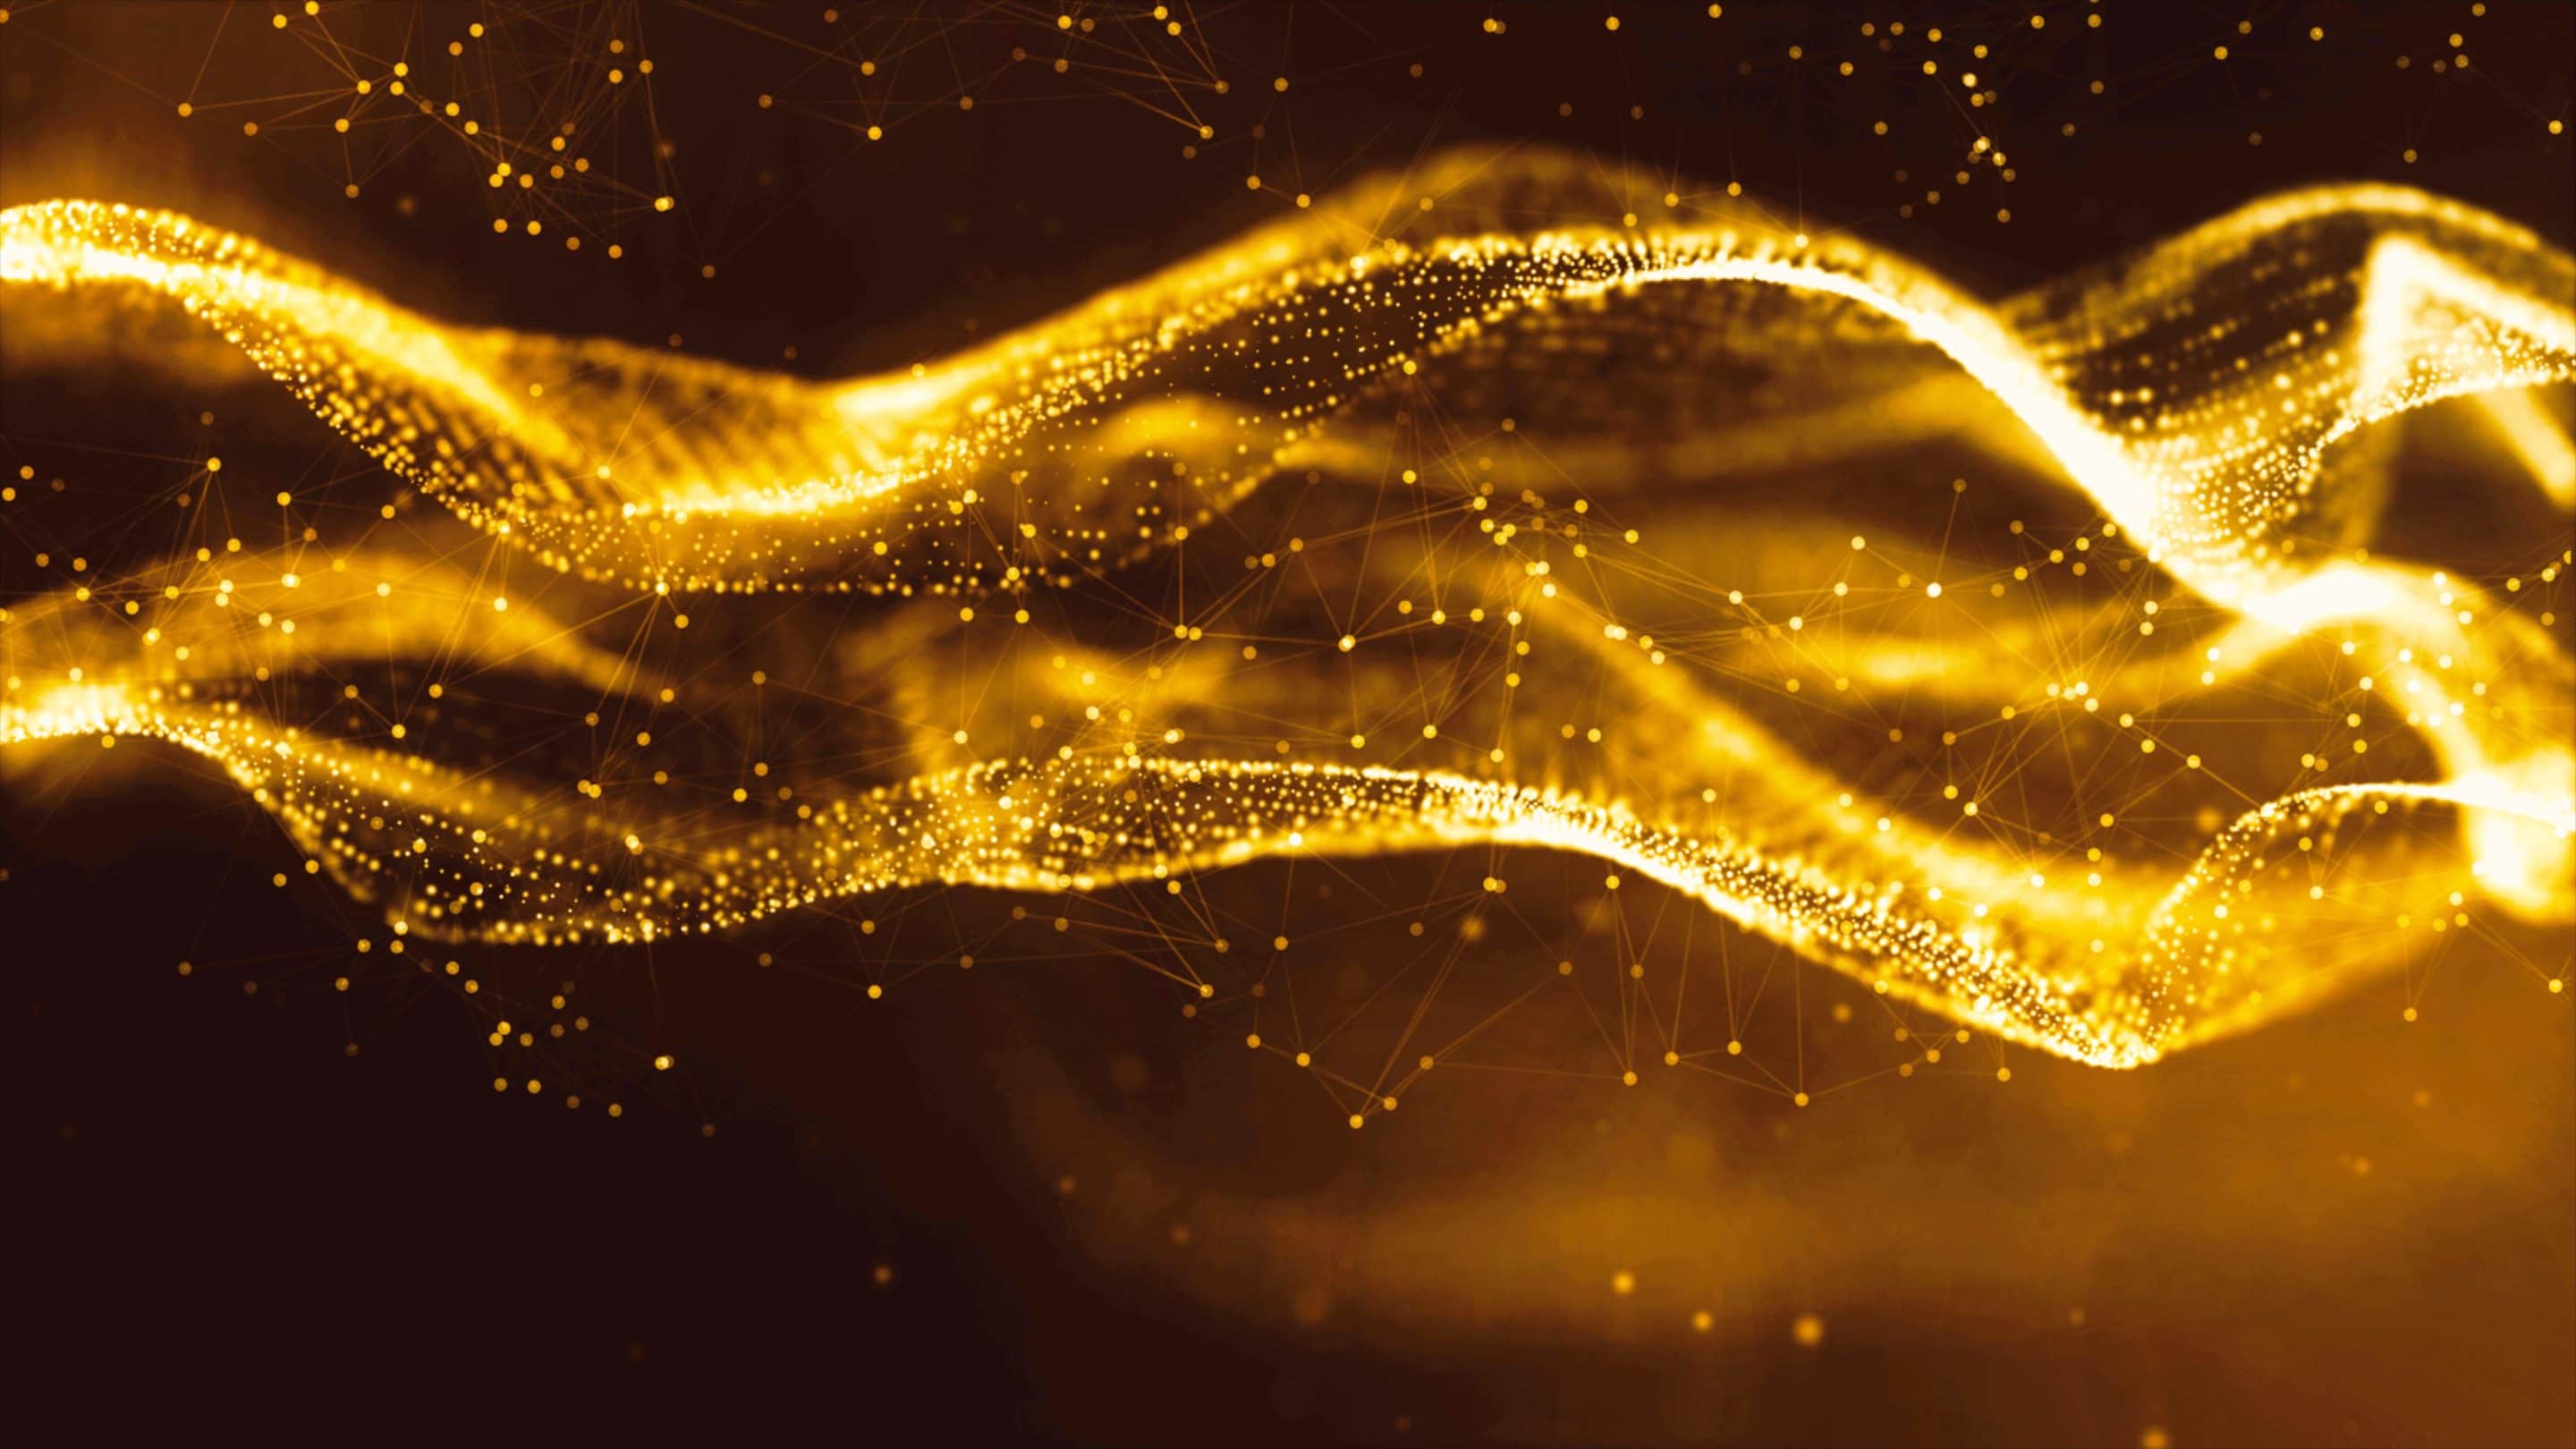 The Golden Thread: How to Strengthen and Trust Your Intuition